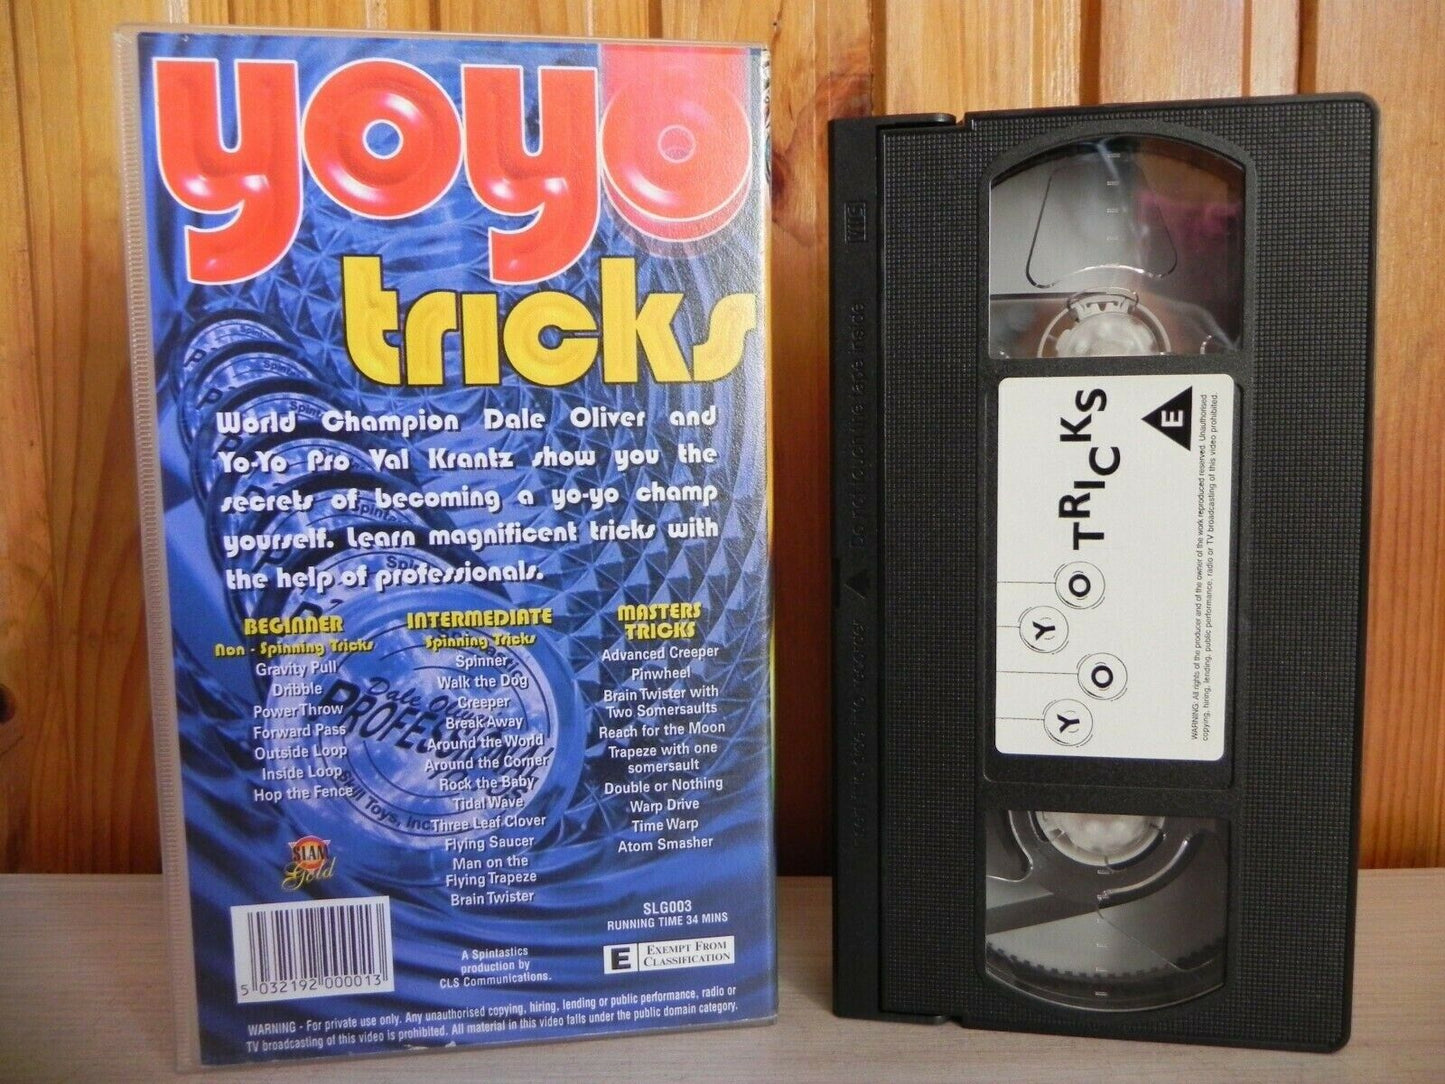 Yoyo Tricks: Beginner to Advanced Guide - Hints, Tricks & Tips [Dale Oliver] VHS-